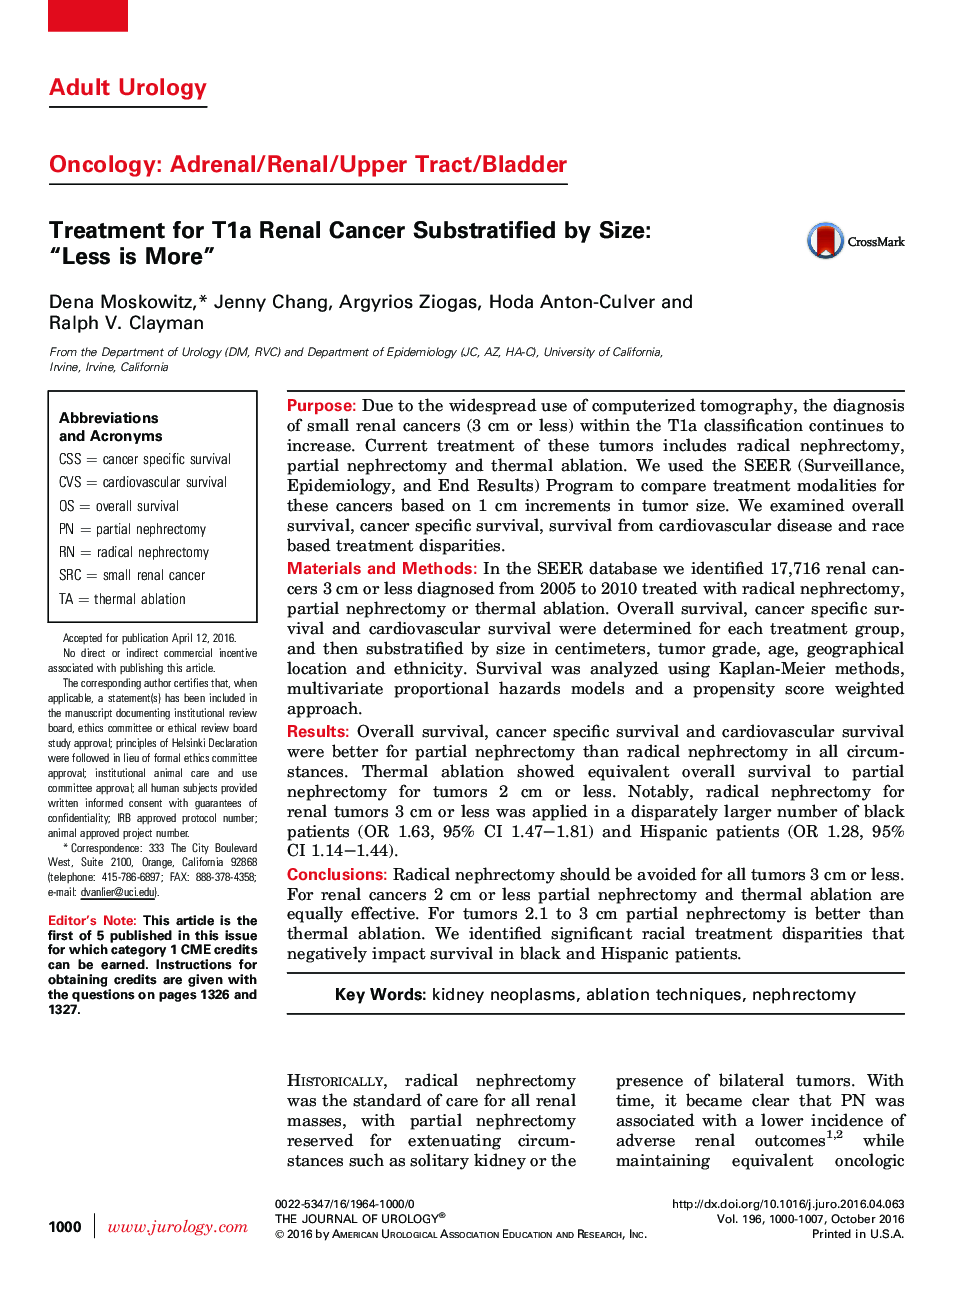 Treatment for T1a Renal Cancer Substratified by Size: “Less is More” 